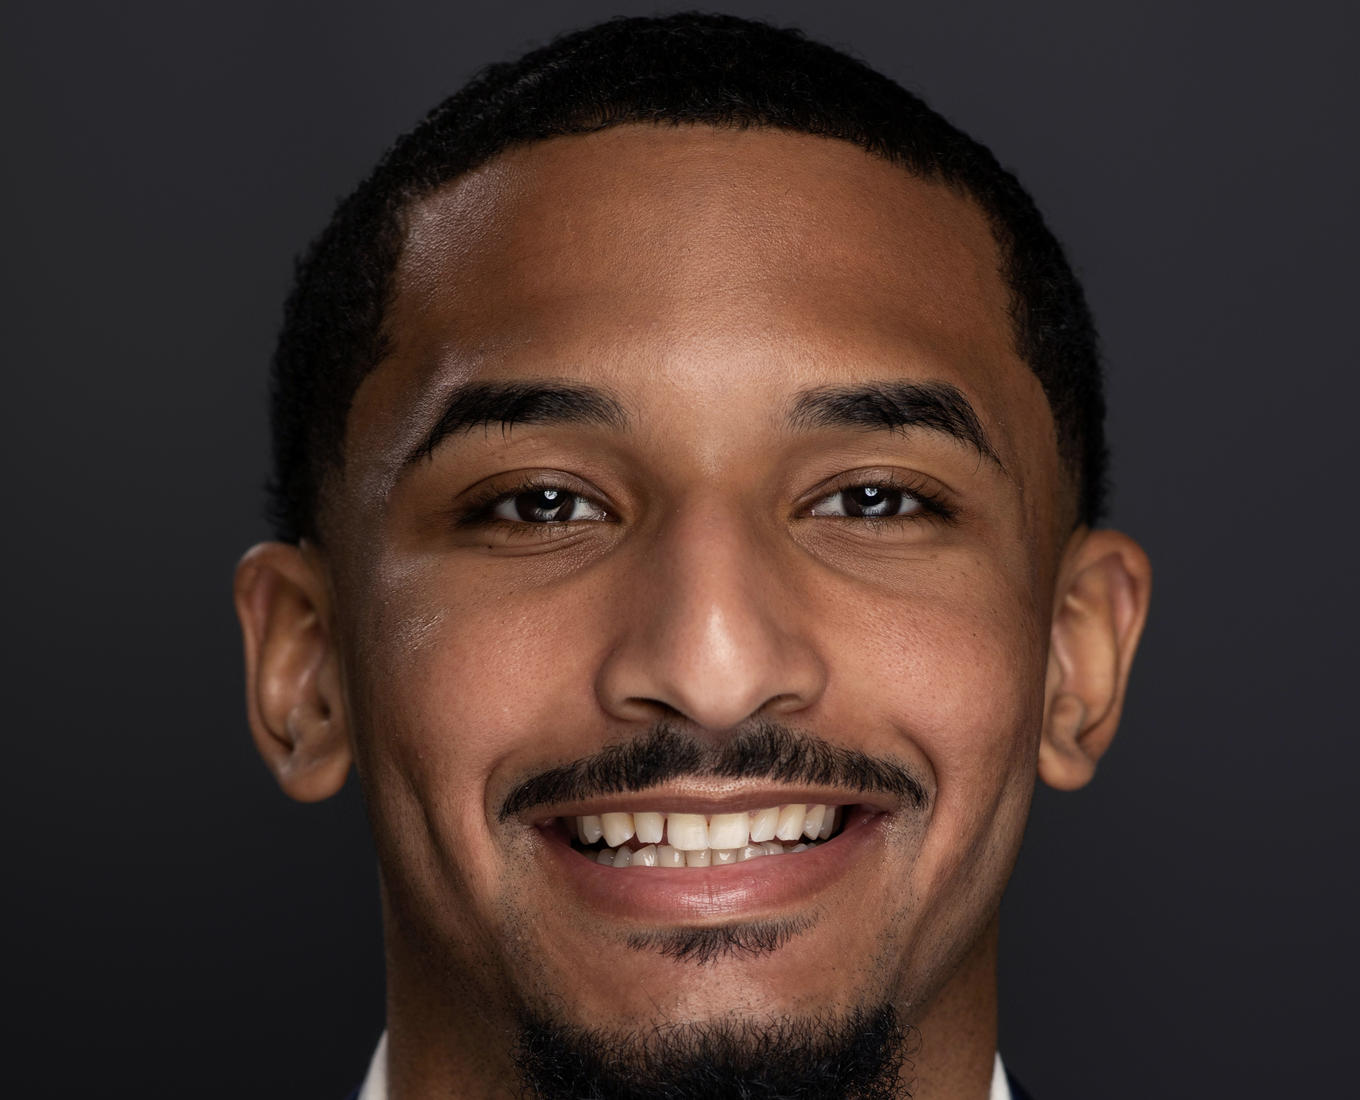 A portrait of a smiling young man with a goatee and short hair. He's wearing a white collared shirt and a dark jacket